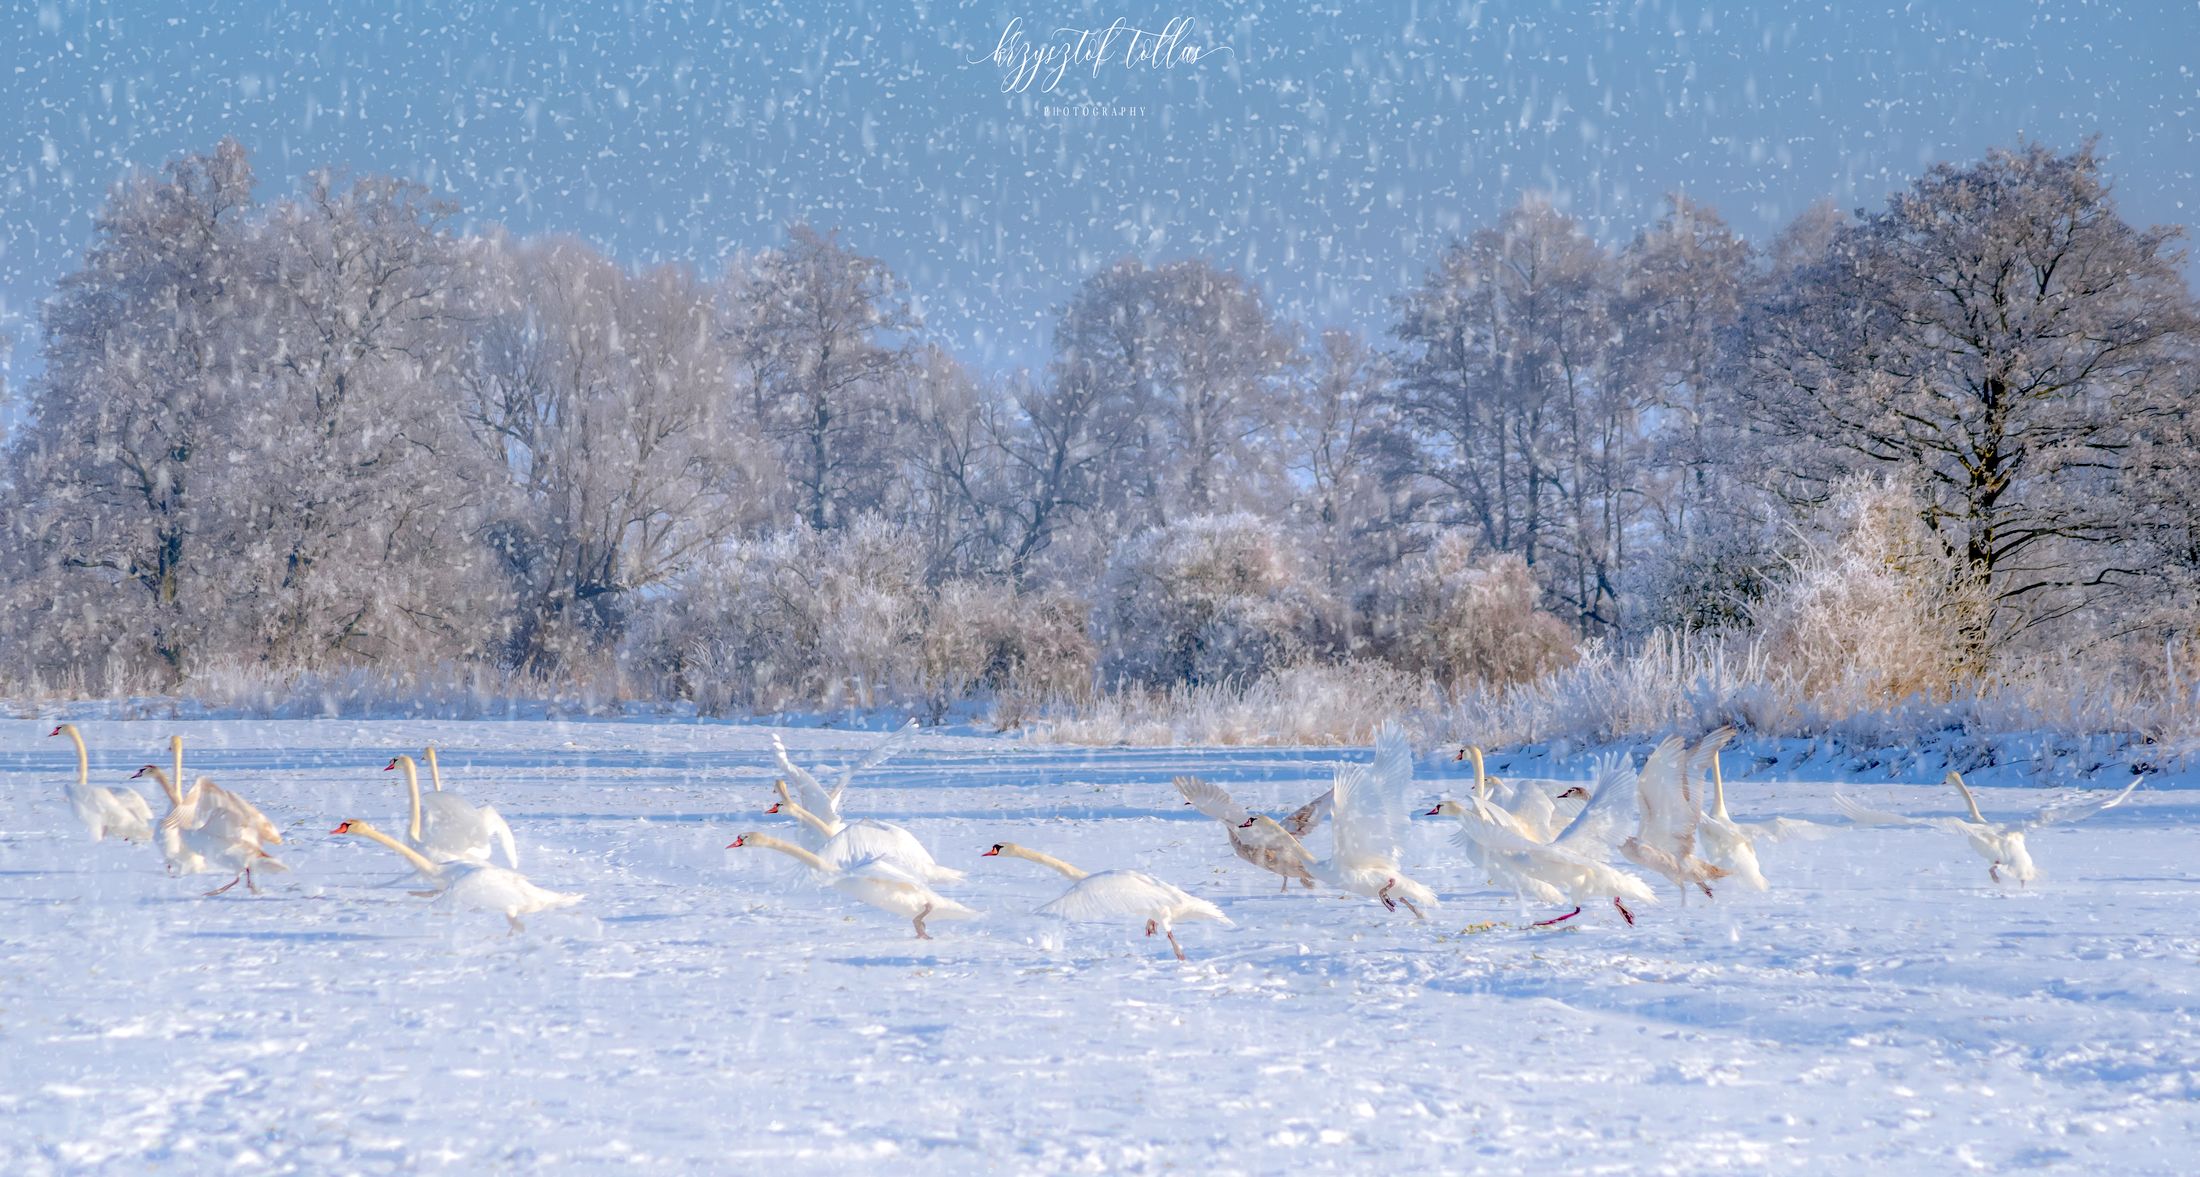 swans, winter, morning, snow, flying swans, landscape, nature, calm, field, sky, winter atmosphere, light, Krzysztof Tollas